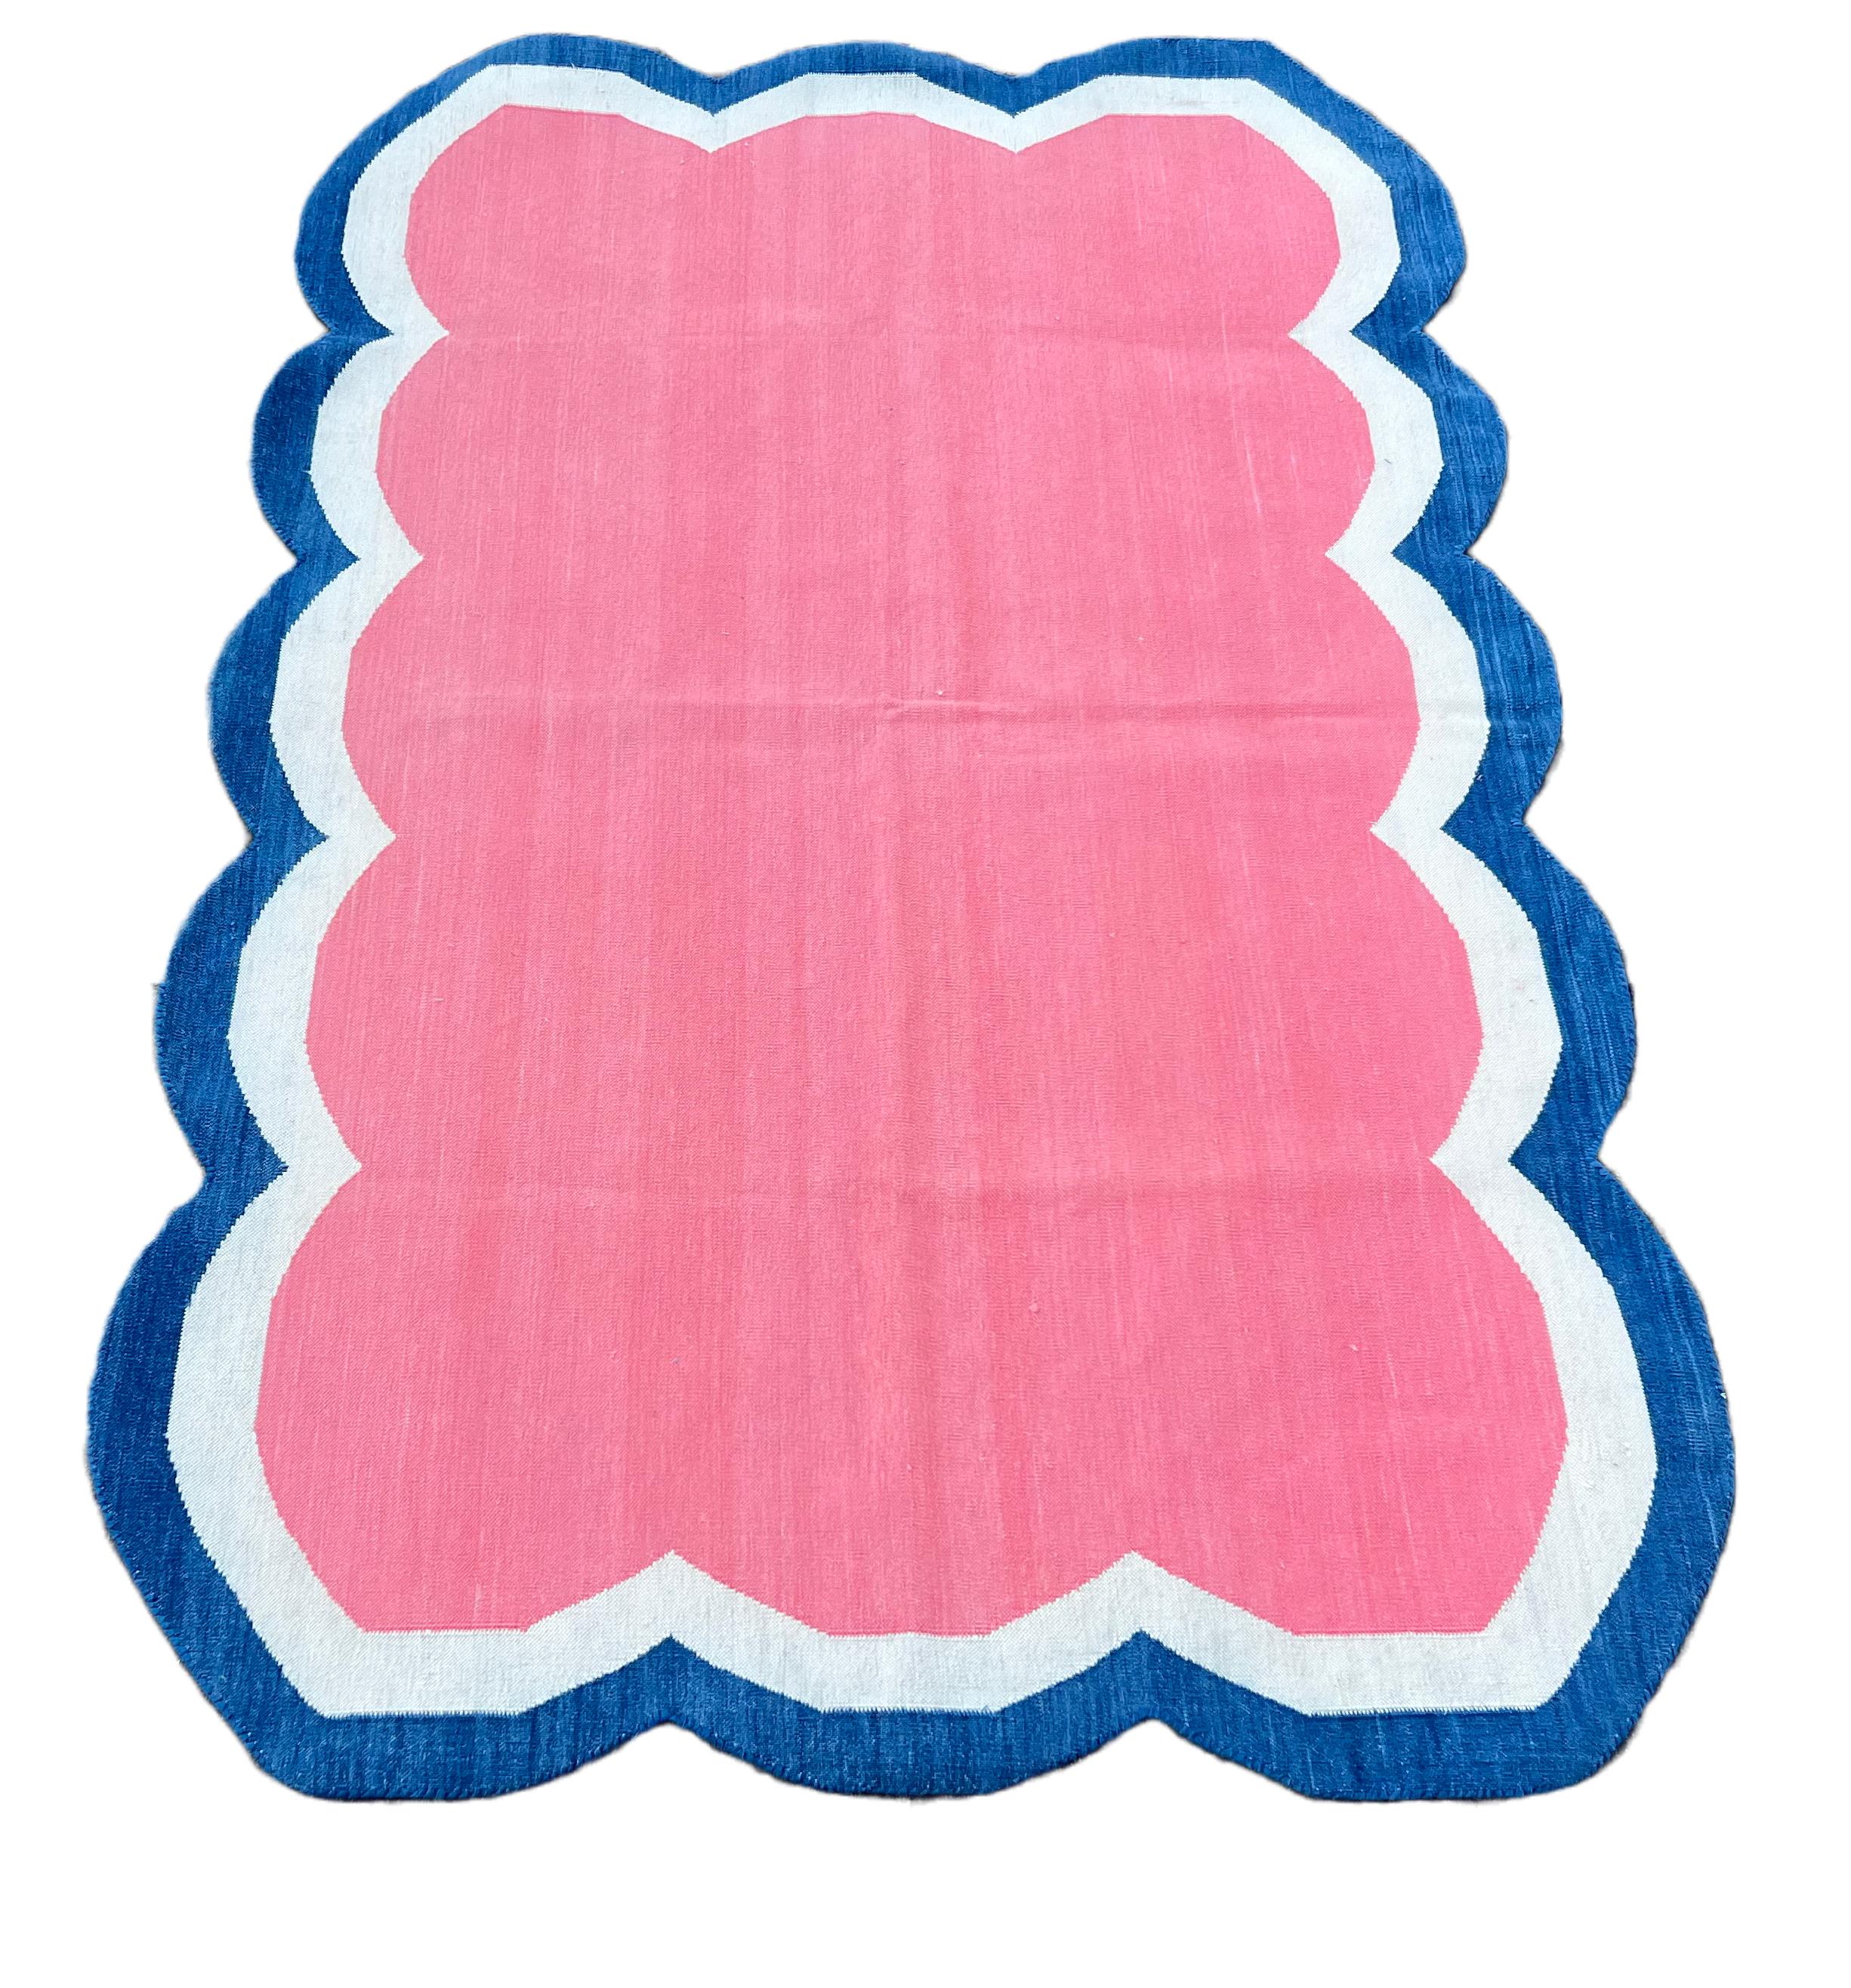 Hand-Woven Handmade Cotton Area Flat Weave Rug, 3x5 Pink And Blue Scalloped Kilim Dhurrie For Sale